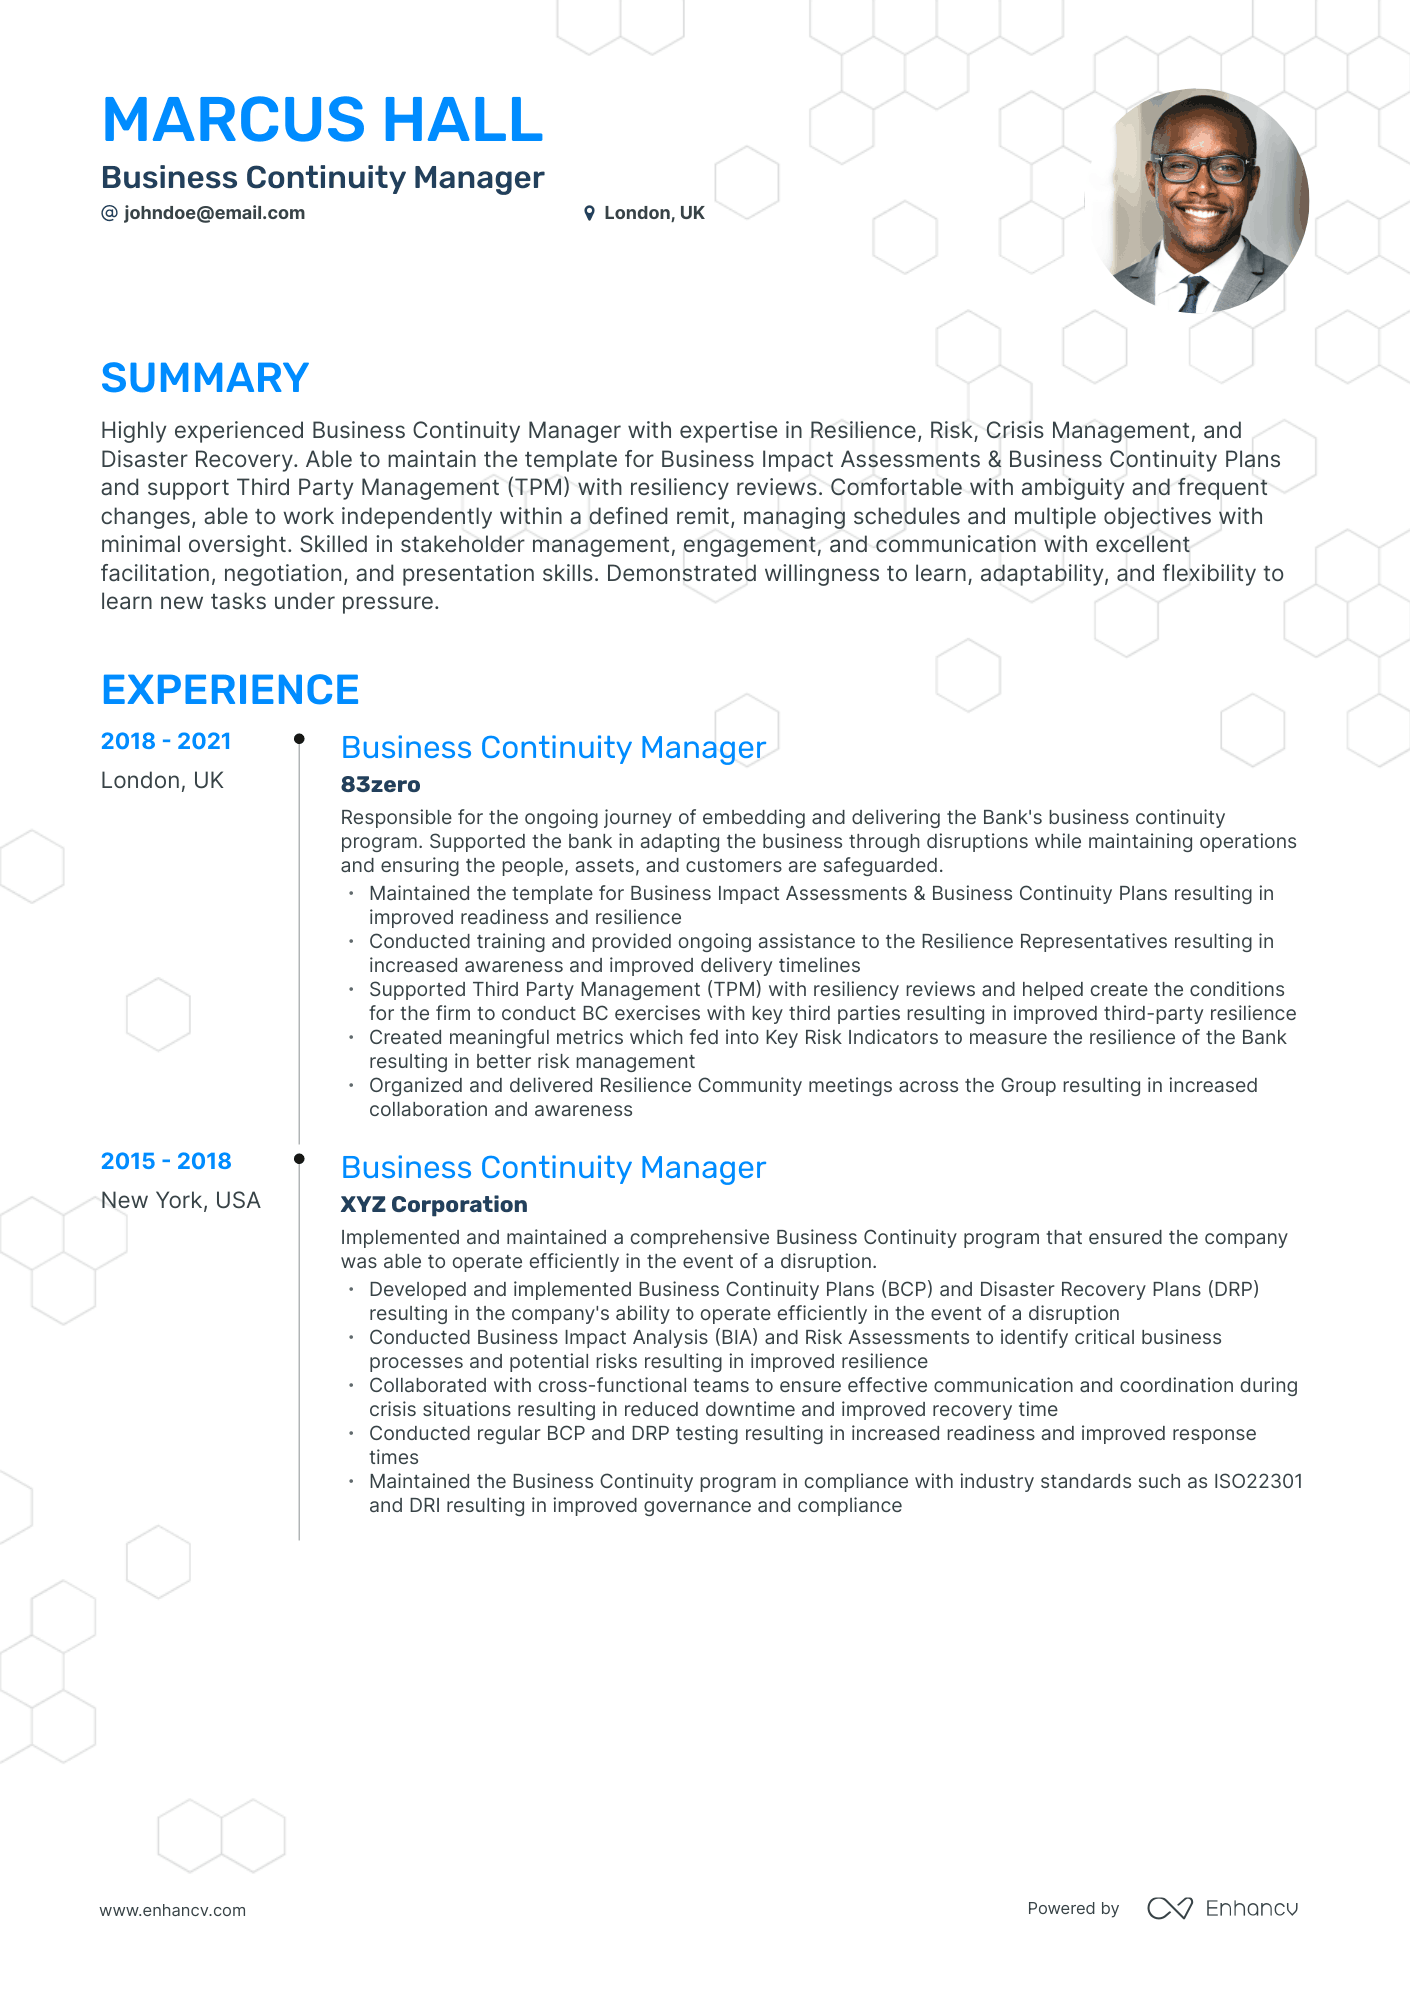 Timeline Business Continuity Manager Resume Template